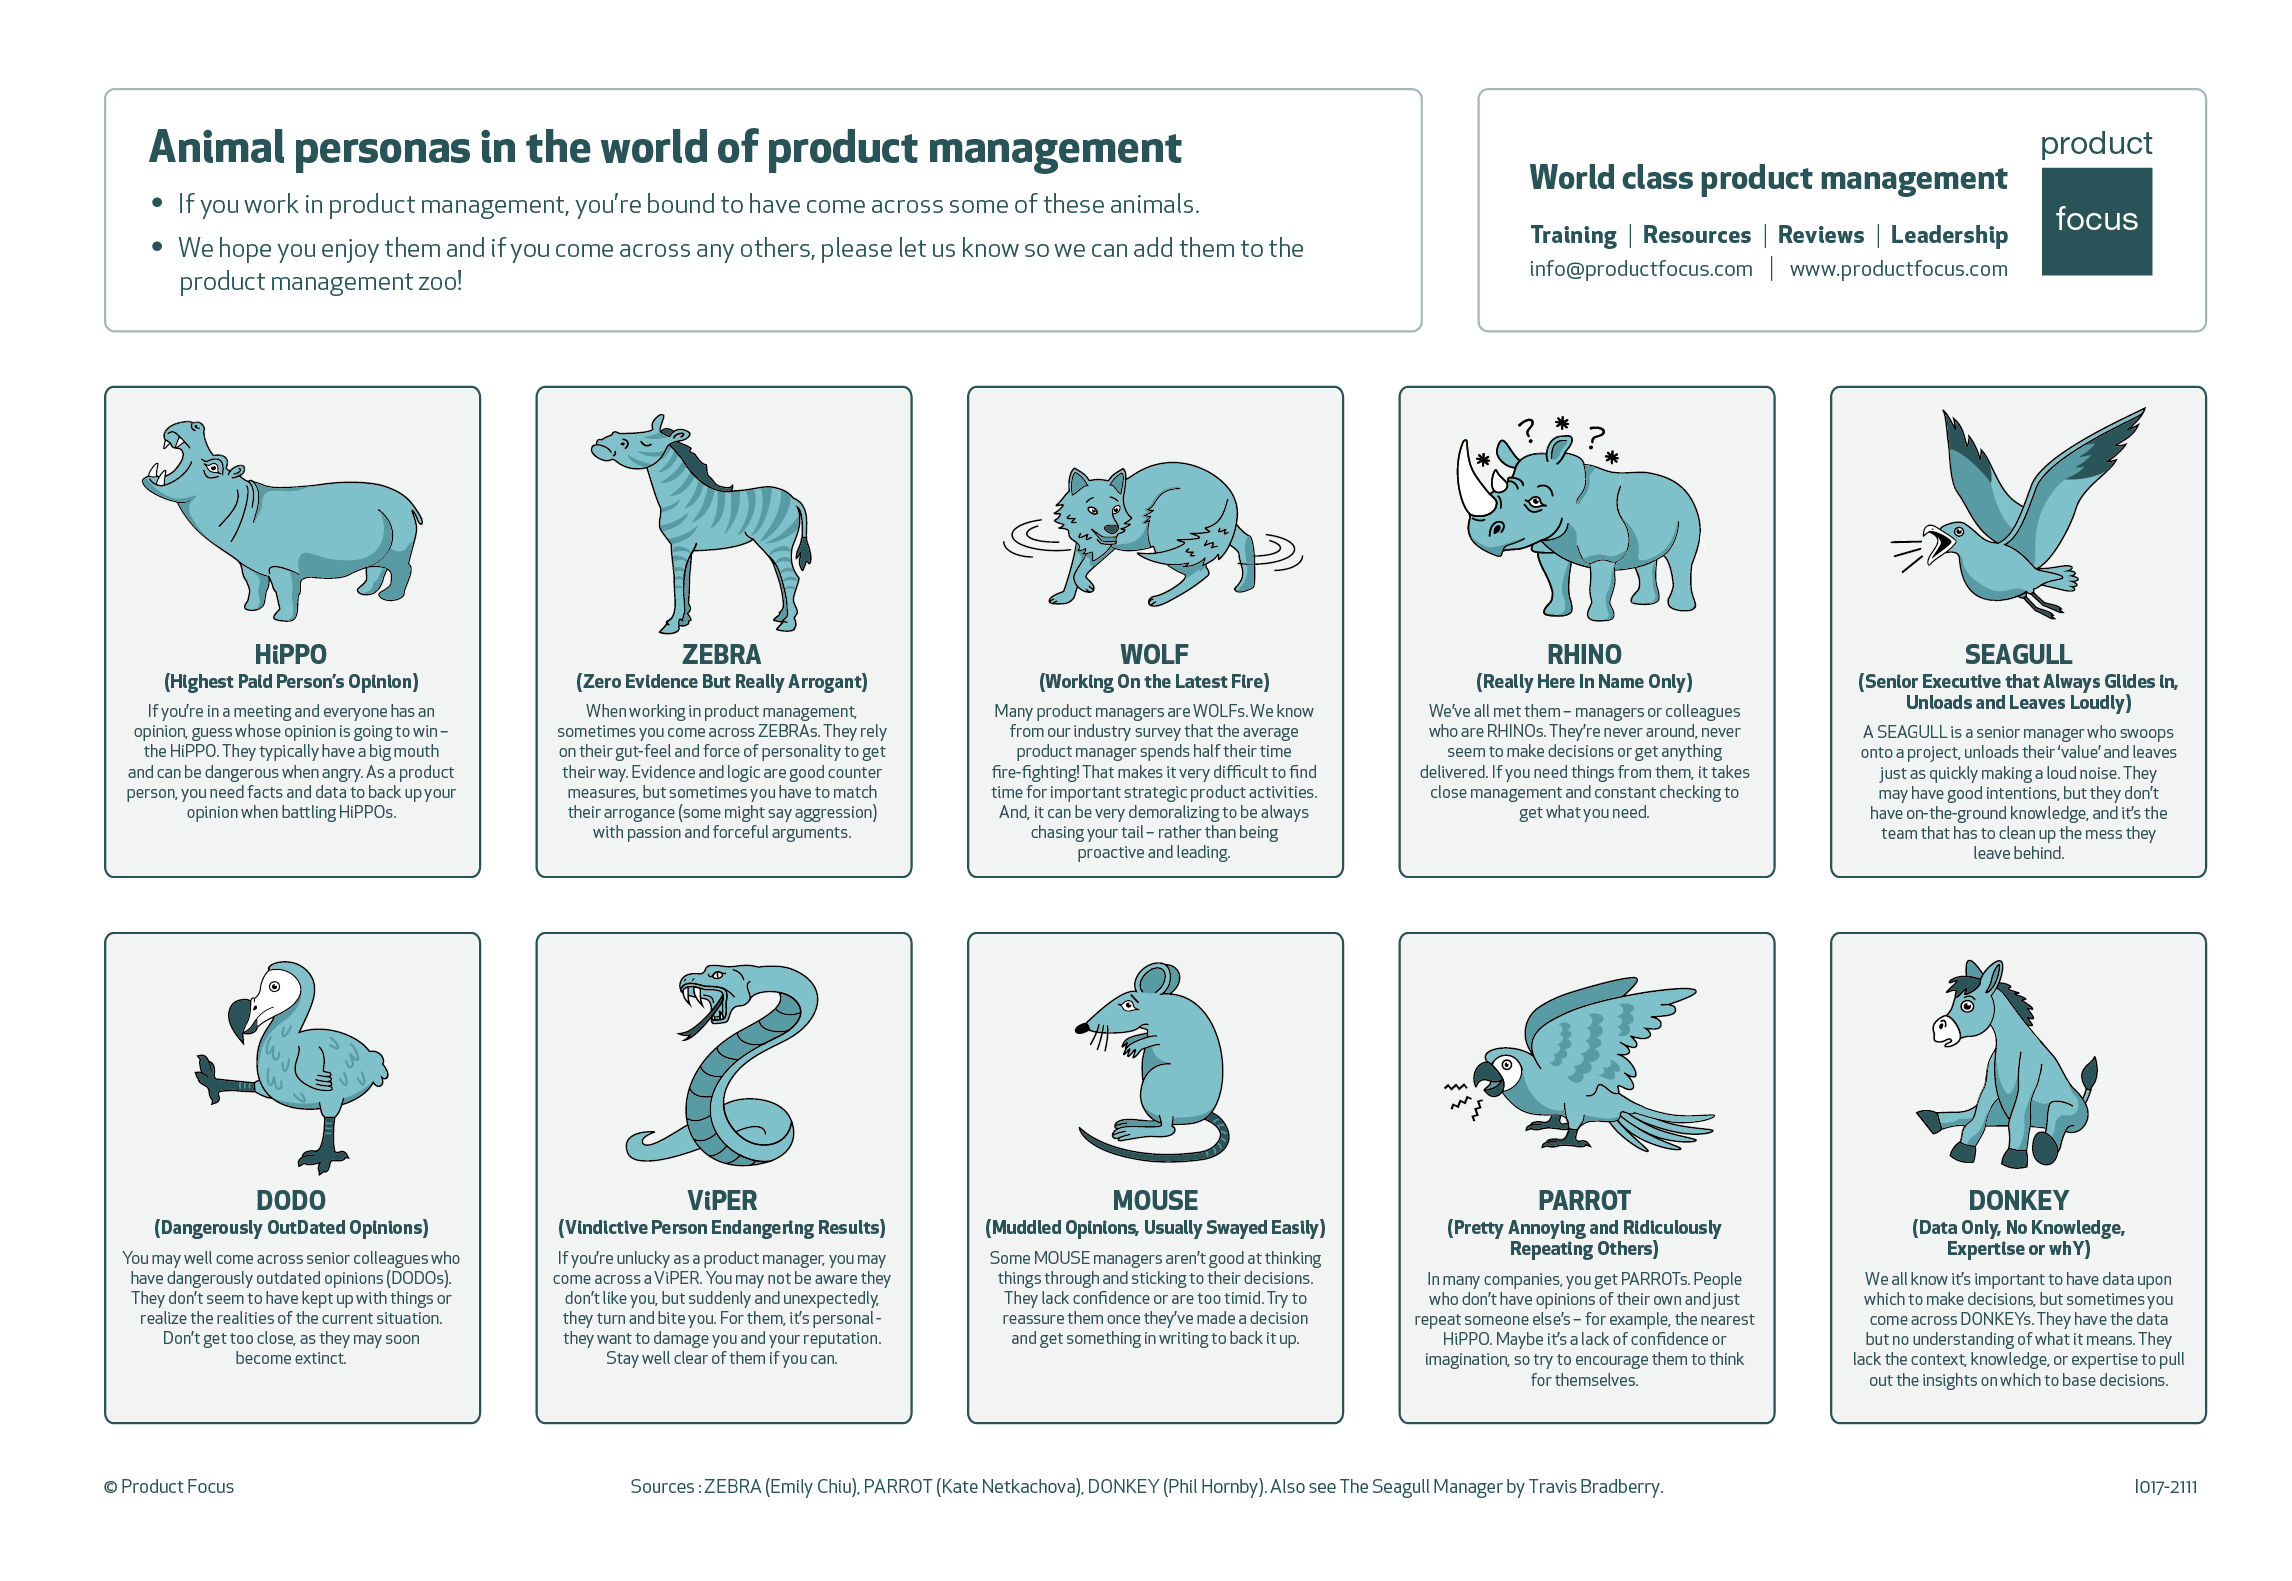 Animal Personas in Product Management | Product Focus